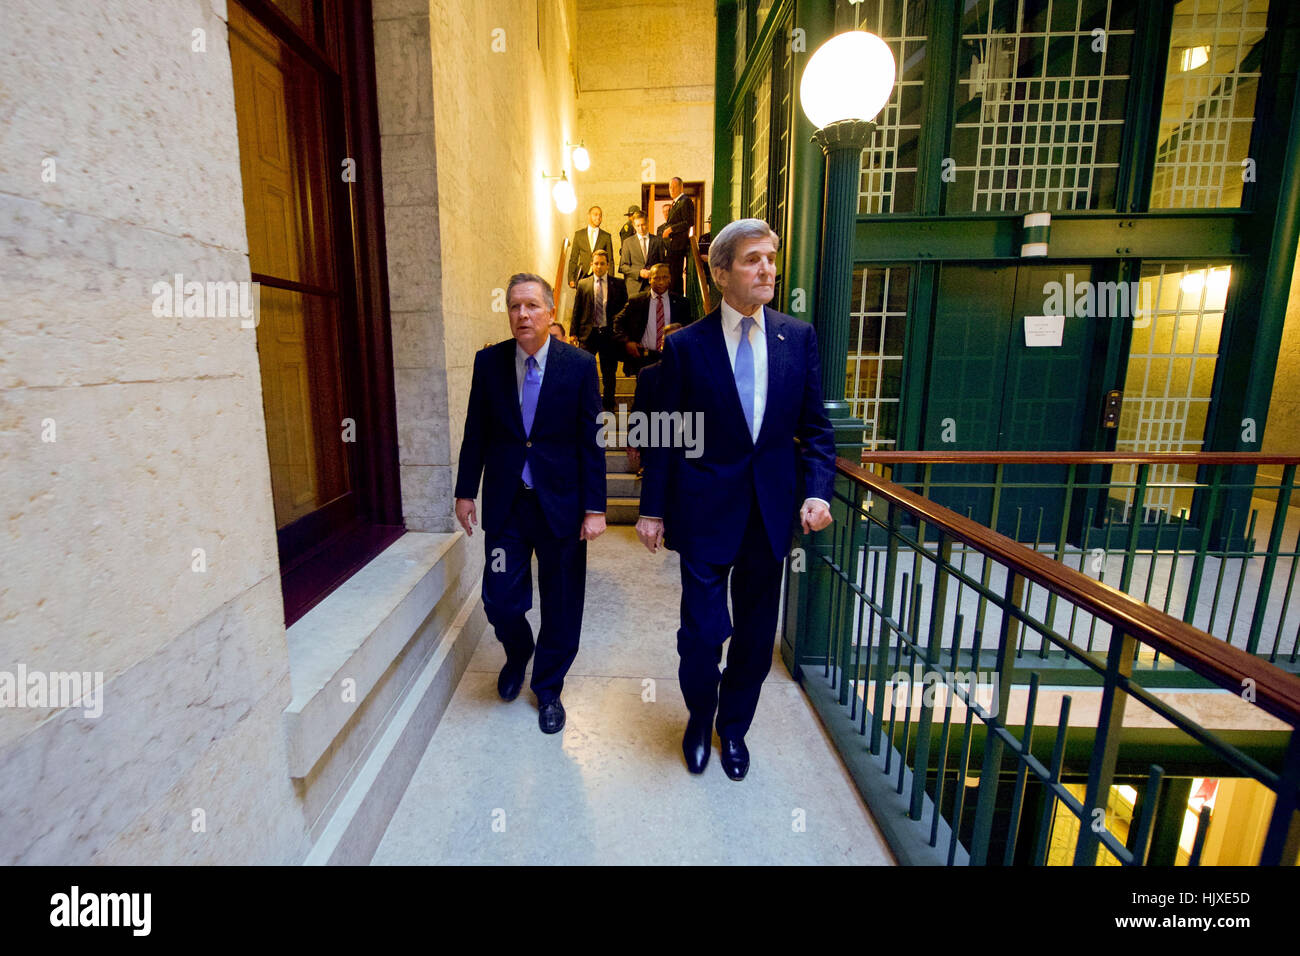 U.S. Secretary of State John Kerry walks with Ohio Governor John Kasich after they paid their respects to the late astronaut John Glenn, the Secretary’s friend and former U.S. Senate colleague, as his body lie in repose in the Ohio Statehouse in Columbus, Ohio, on December 16, 2016. Stock Photo